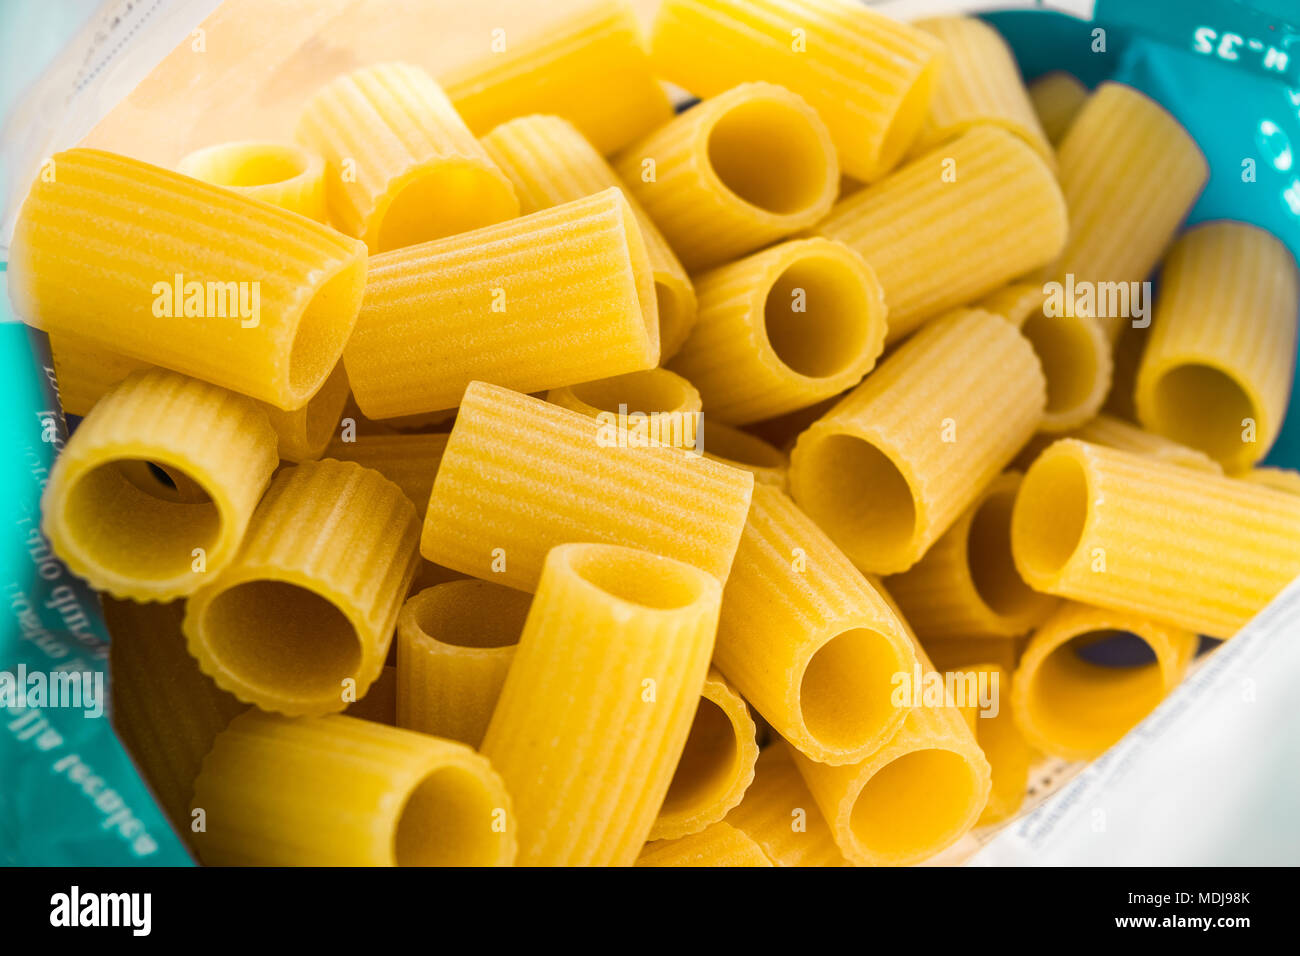 Italian pasta in the packing bag Stock Photo